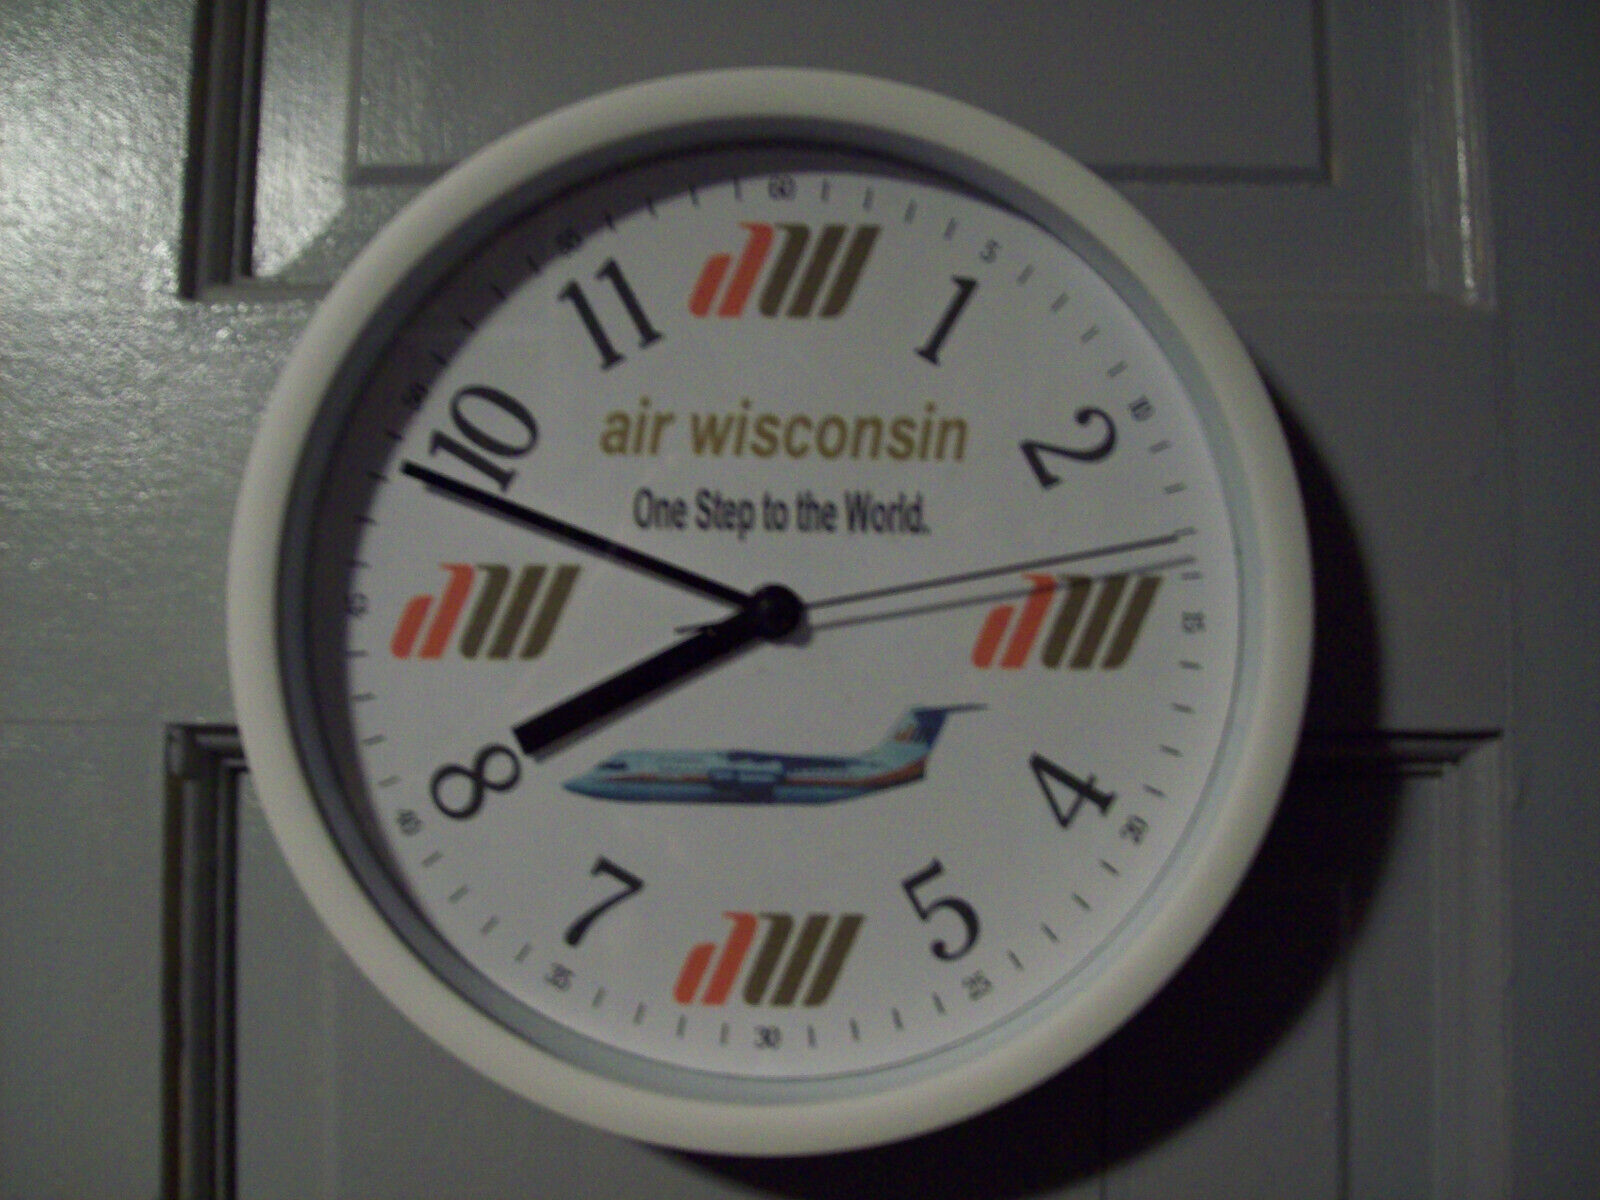 AIR WISCONSIN BA-146 WALL CLOCK  AMERICAN AIRLINES  UNITED AIRLINES